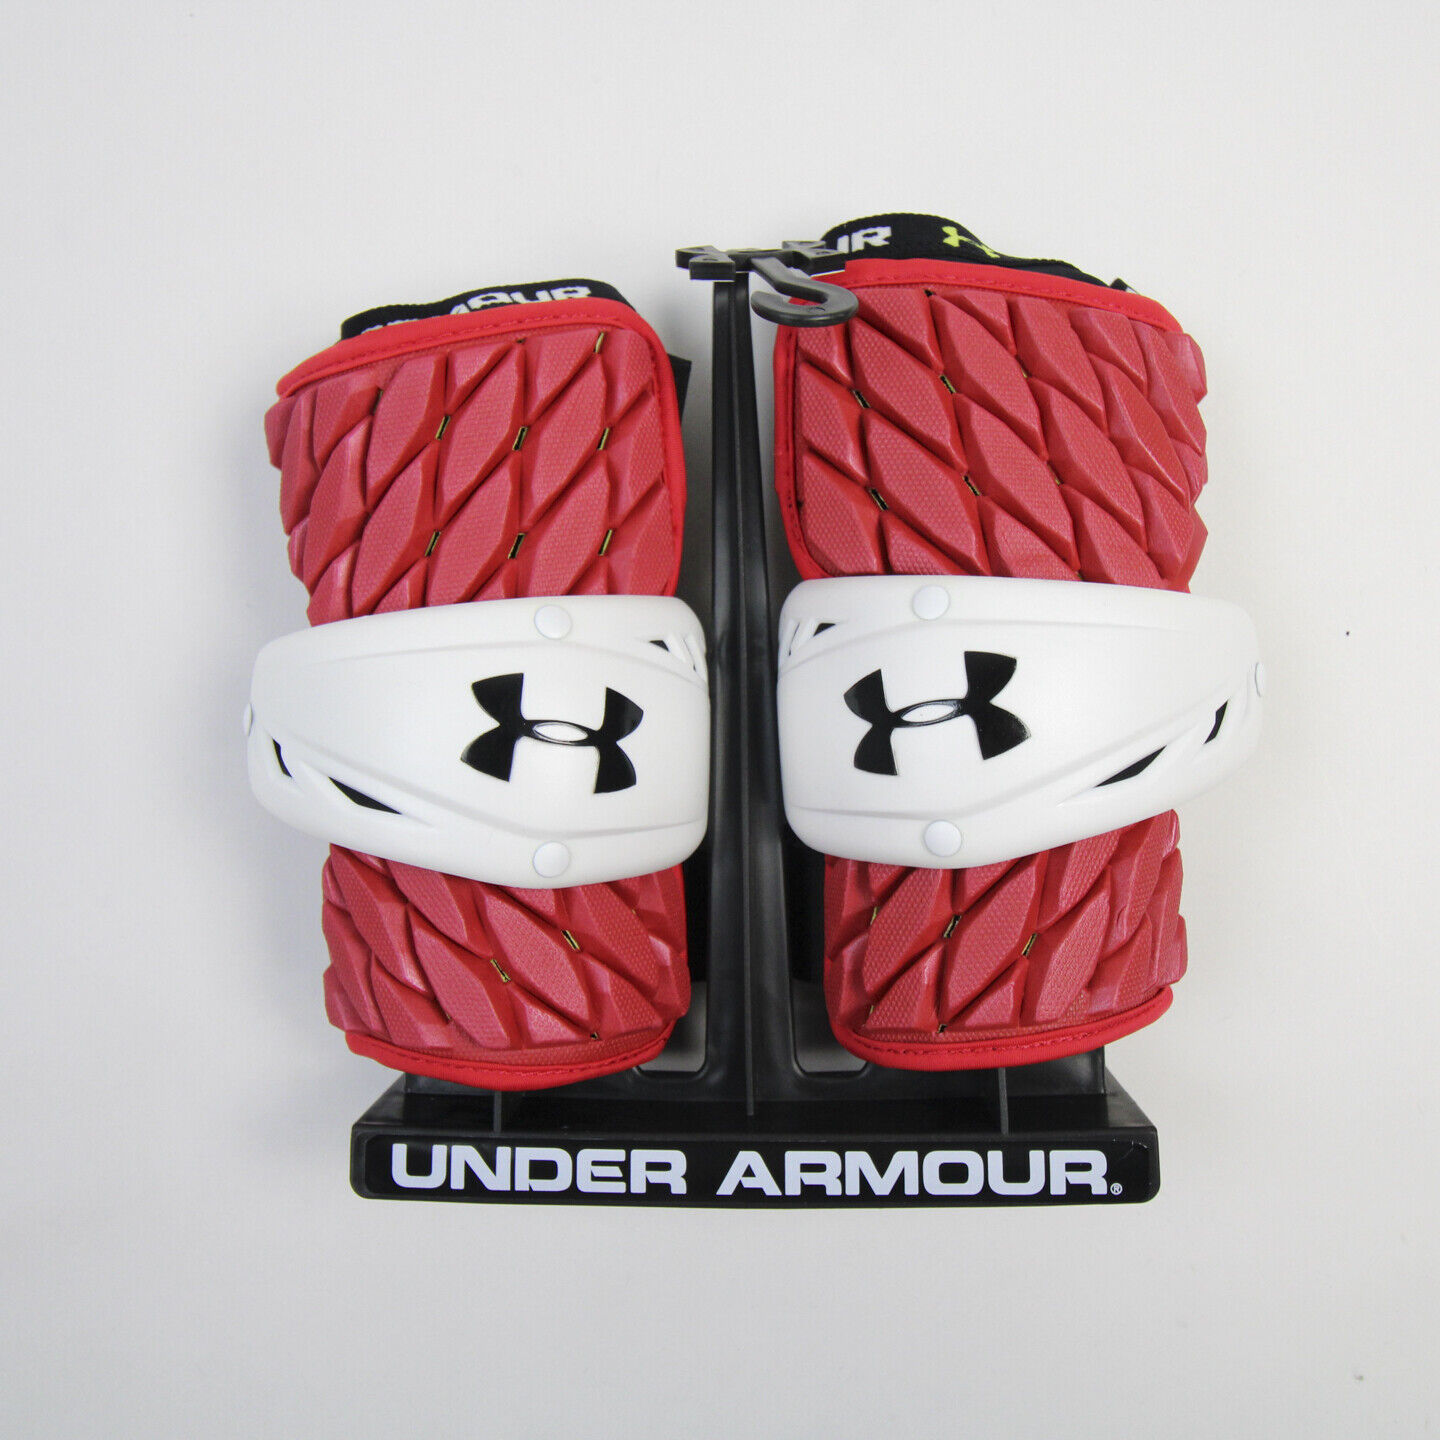 Under Armour Lacrosse Arm Pads Unisex Adult L Large Red Black Pair New With Tags